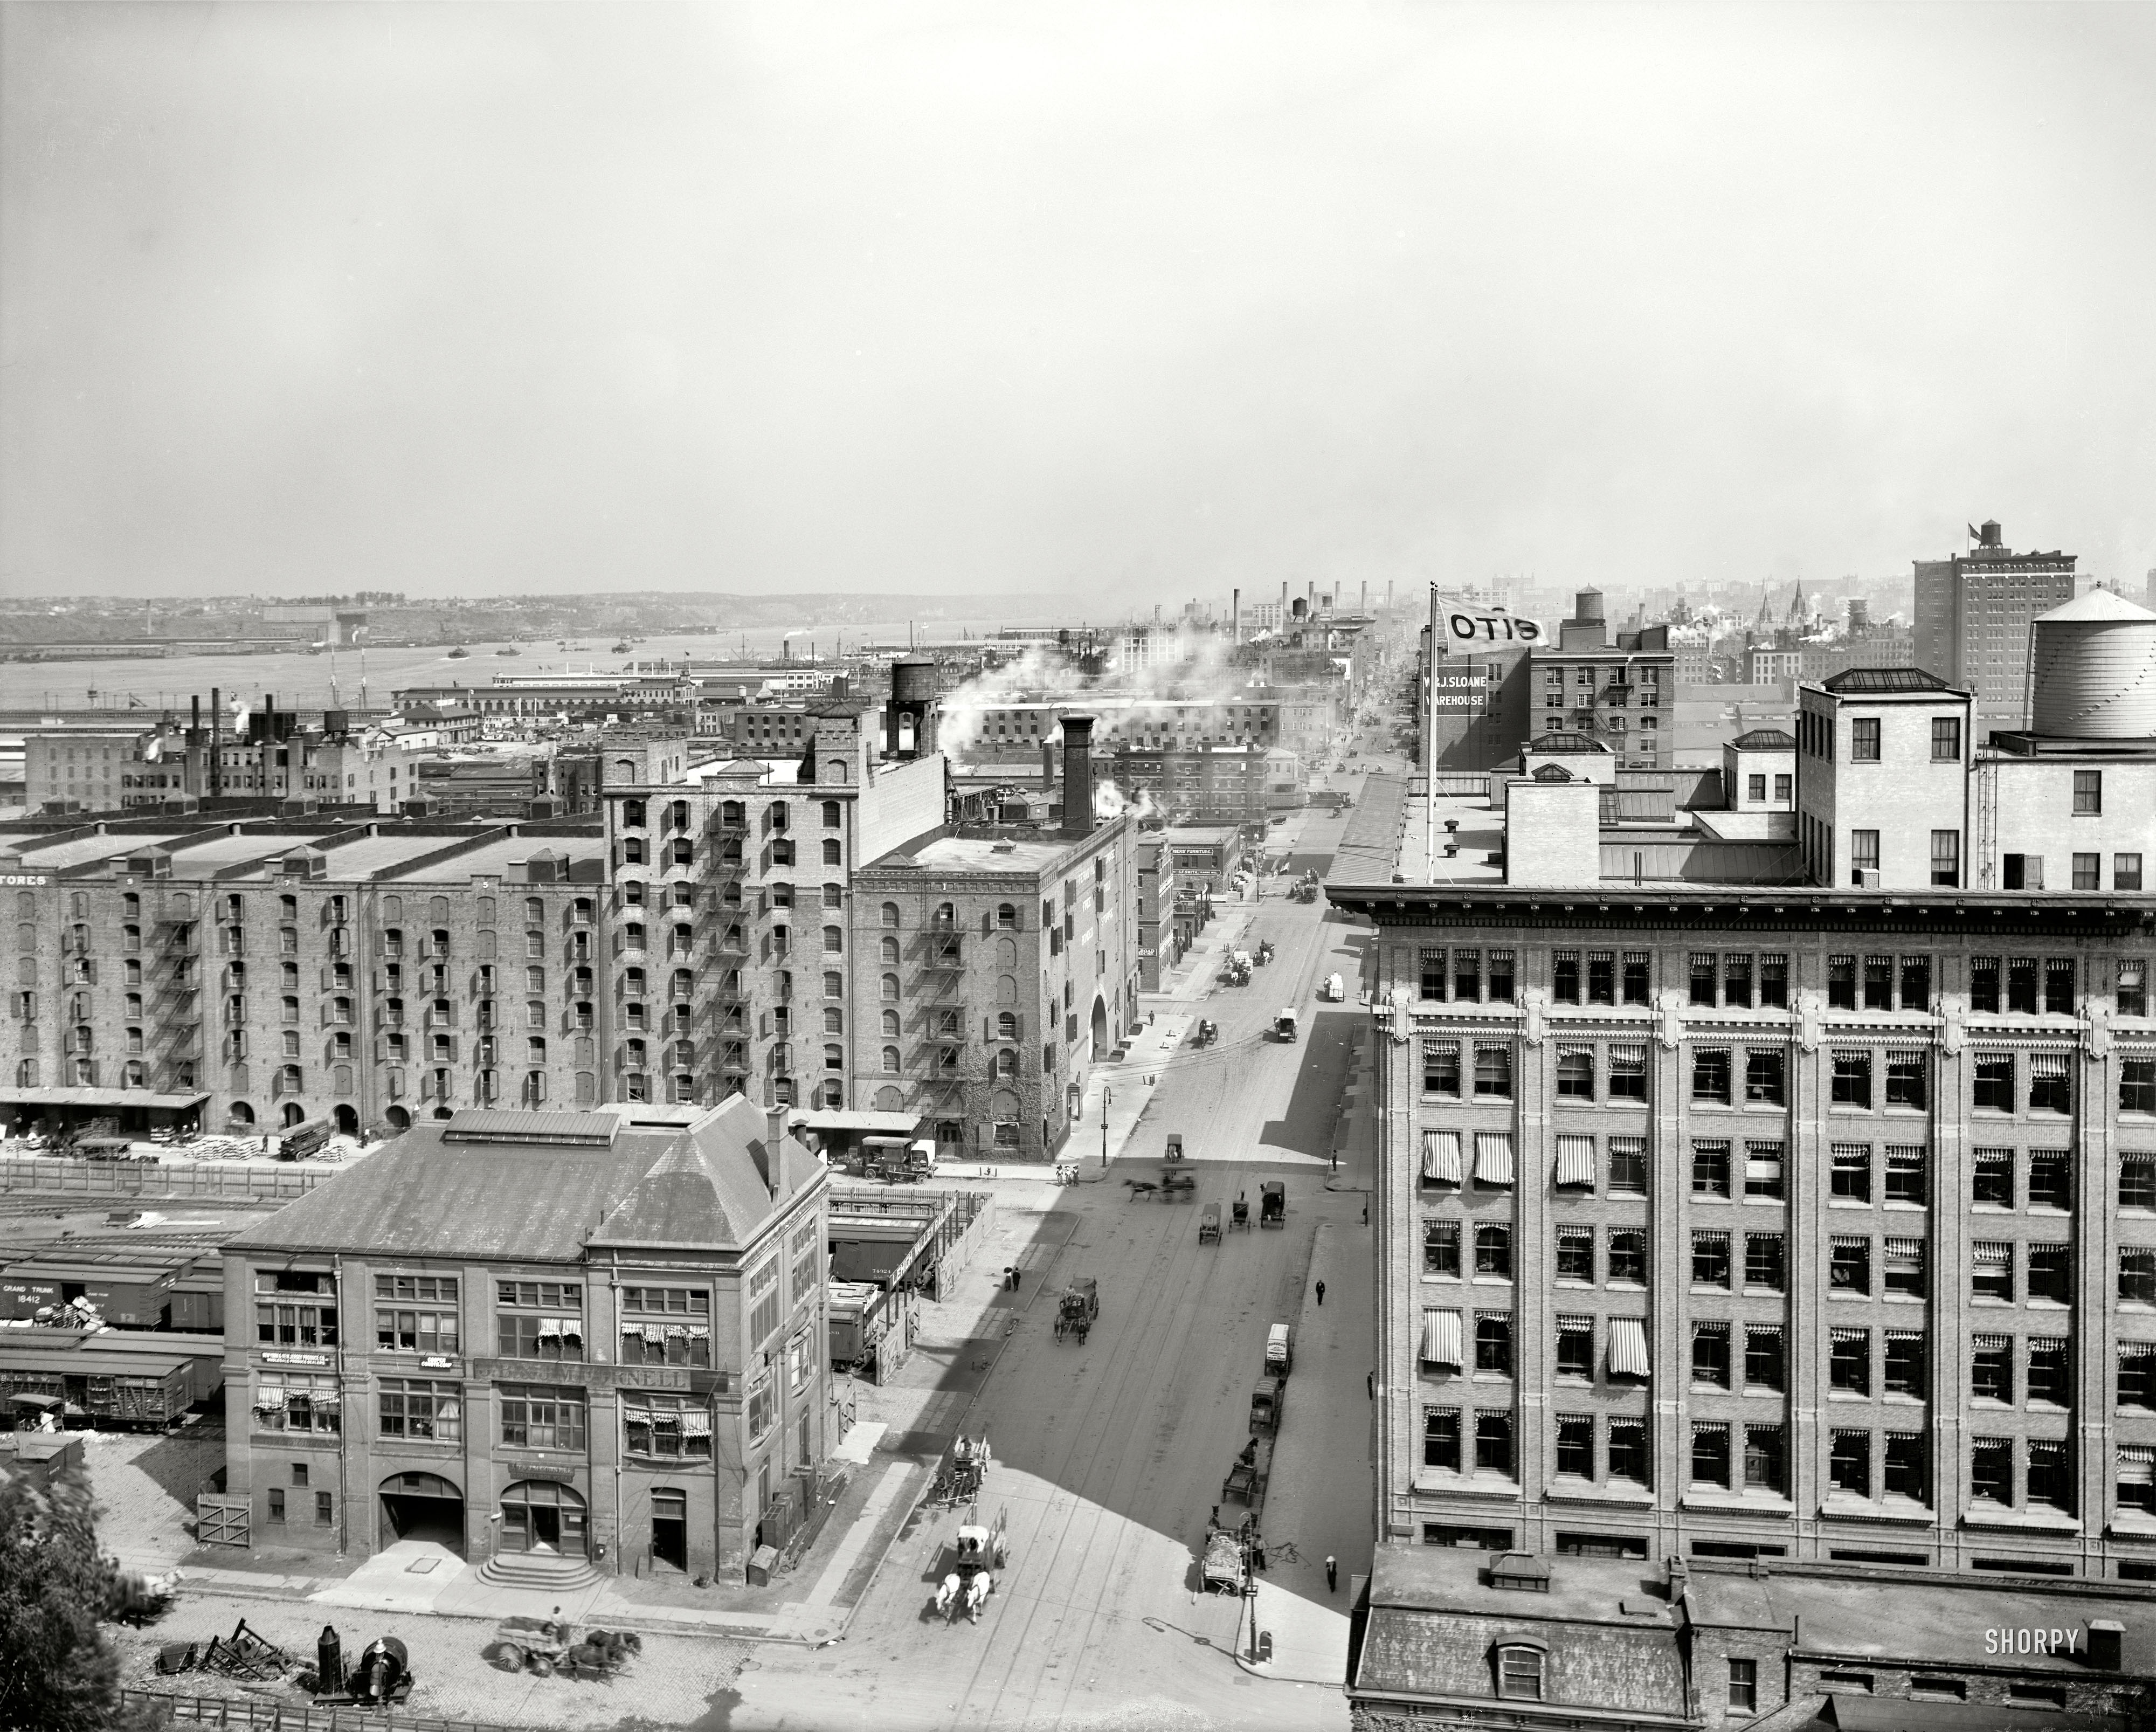 New York circa 1912. "West Street (11th Avenue) north from 26th, view of  Hudson River." As well as the Chelsea Piers and fluttering banner atop the Otis Elevator building. 8x10 glass negative, Detroit Publishing Co. View full size.